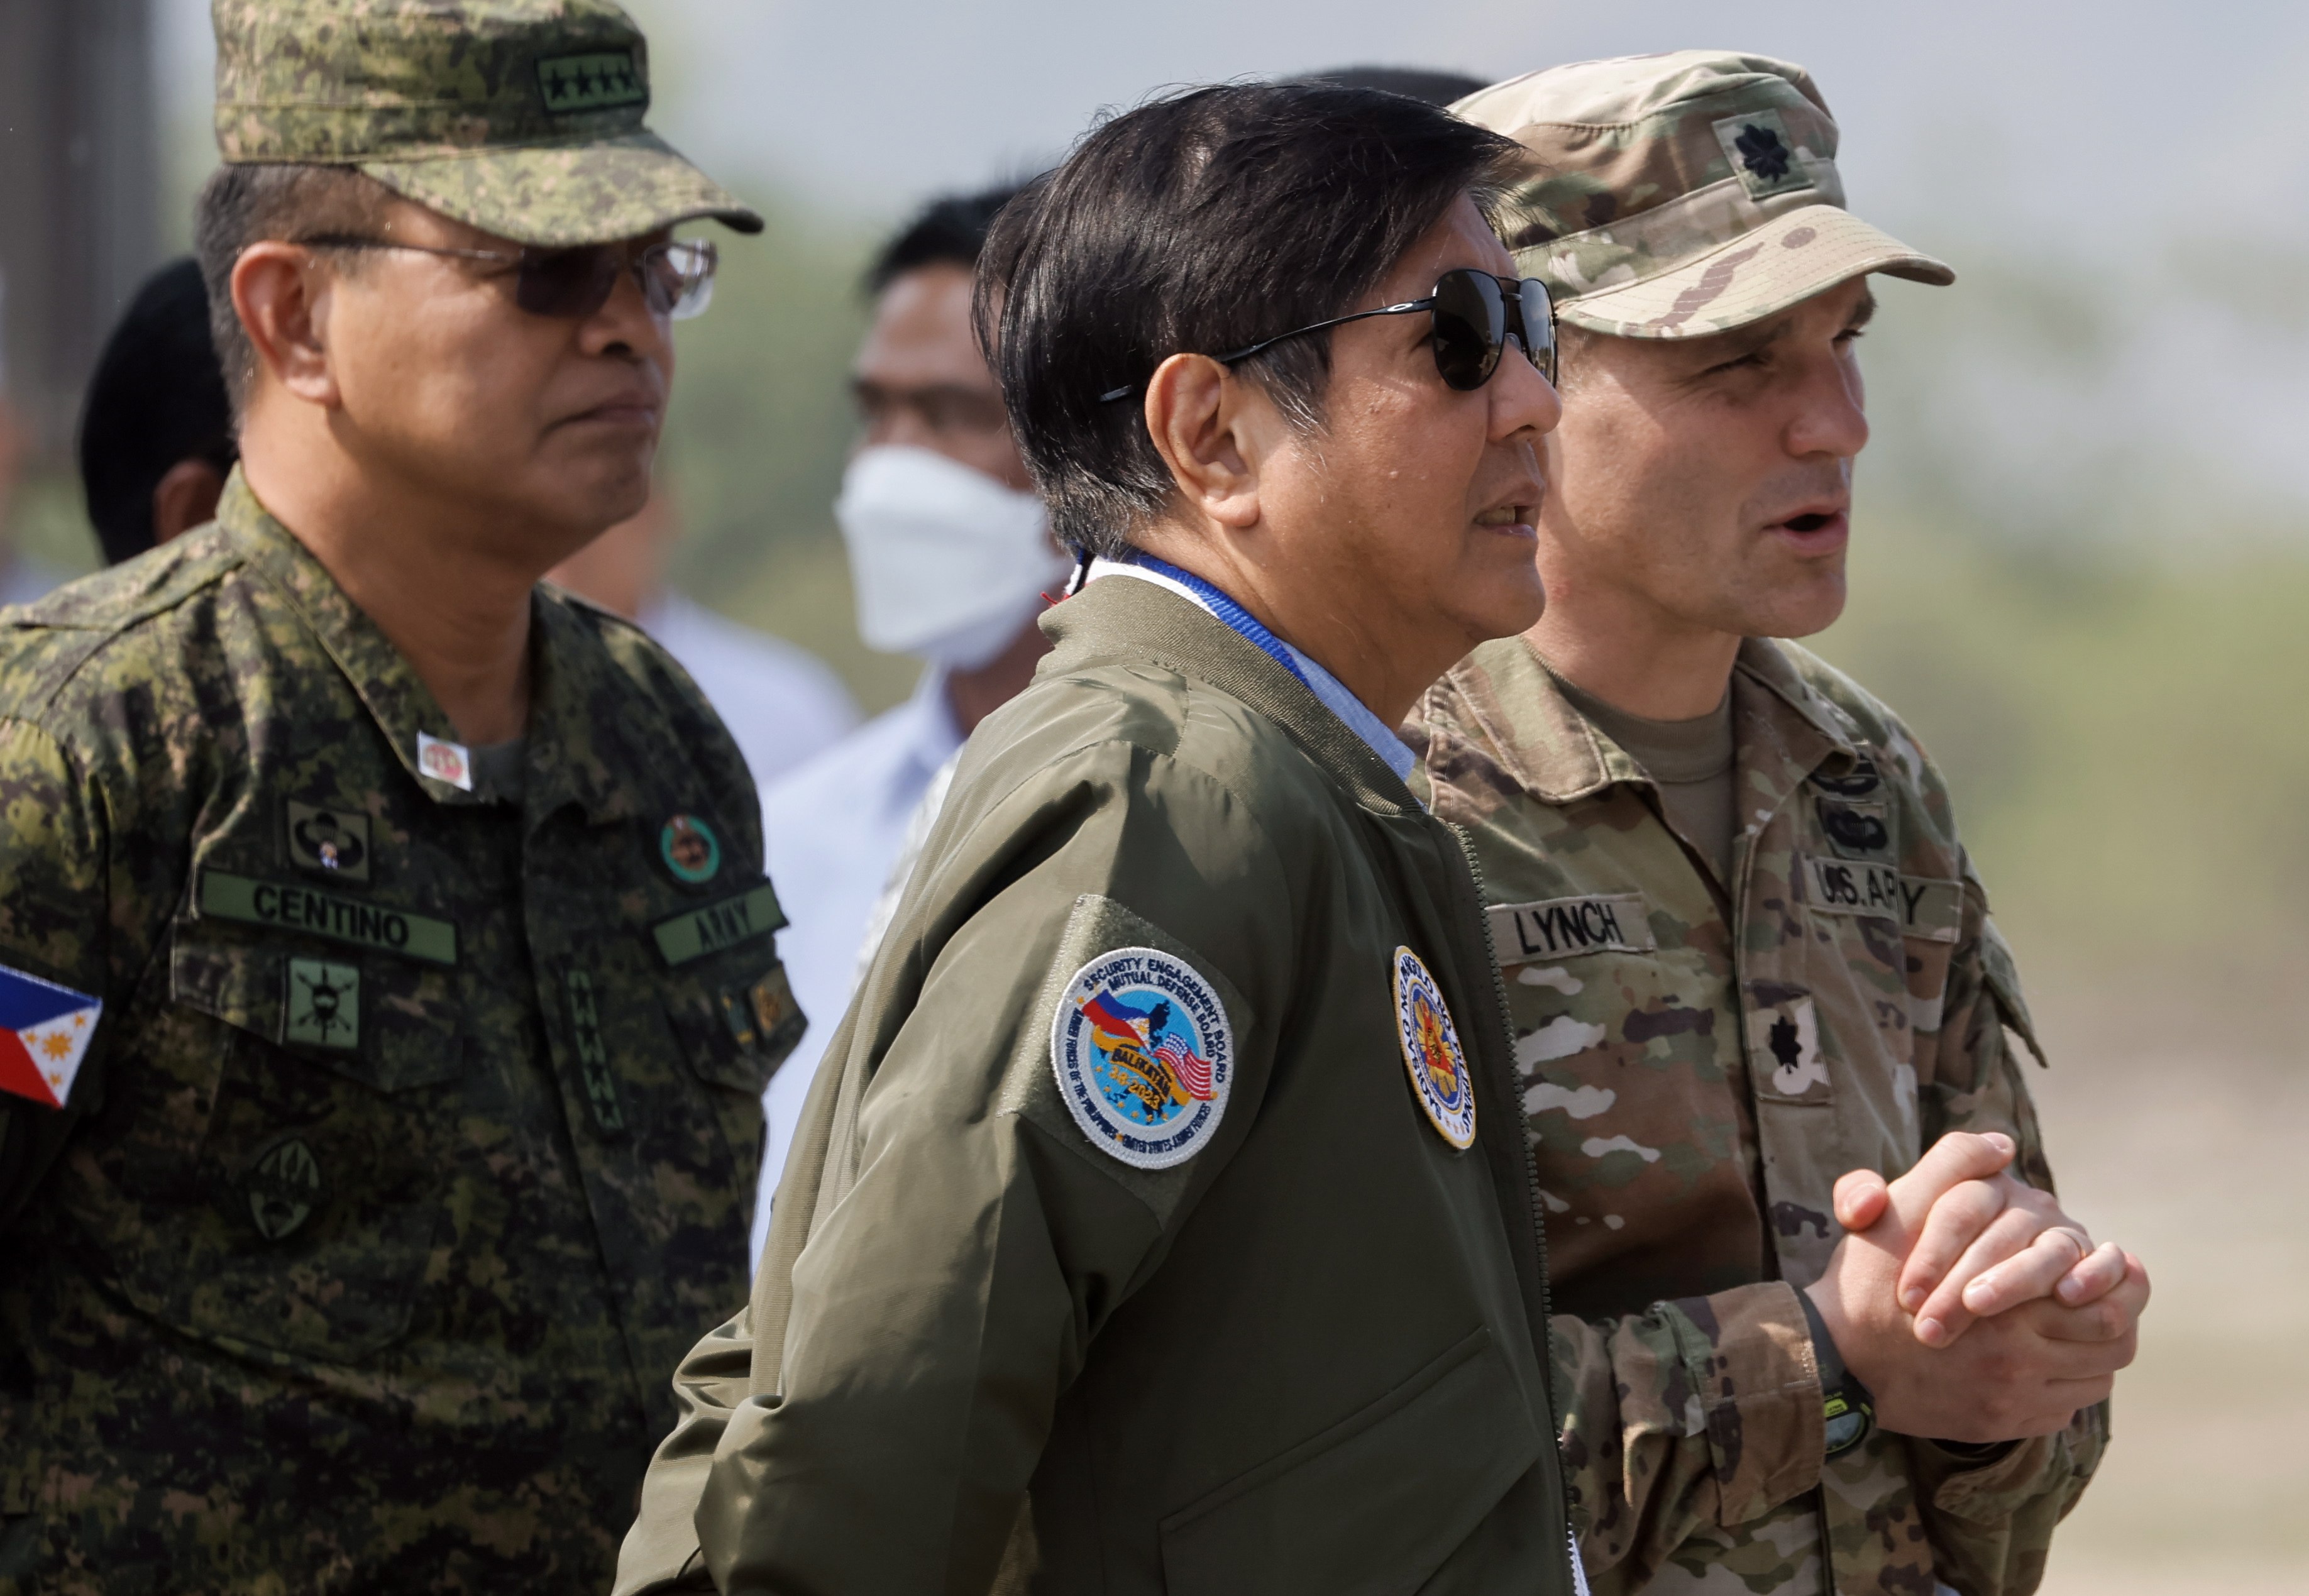 Philippine President Ferdinand Marcos Jnr is joined by Andres Centino, his armed forces chief of staff, and US army lieutenant colonel Timothy Lynch at a Balikatan briefing on April 26 in Zambales province, north of Manila, in the Philippines. Photo: EPA-EFE